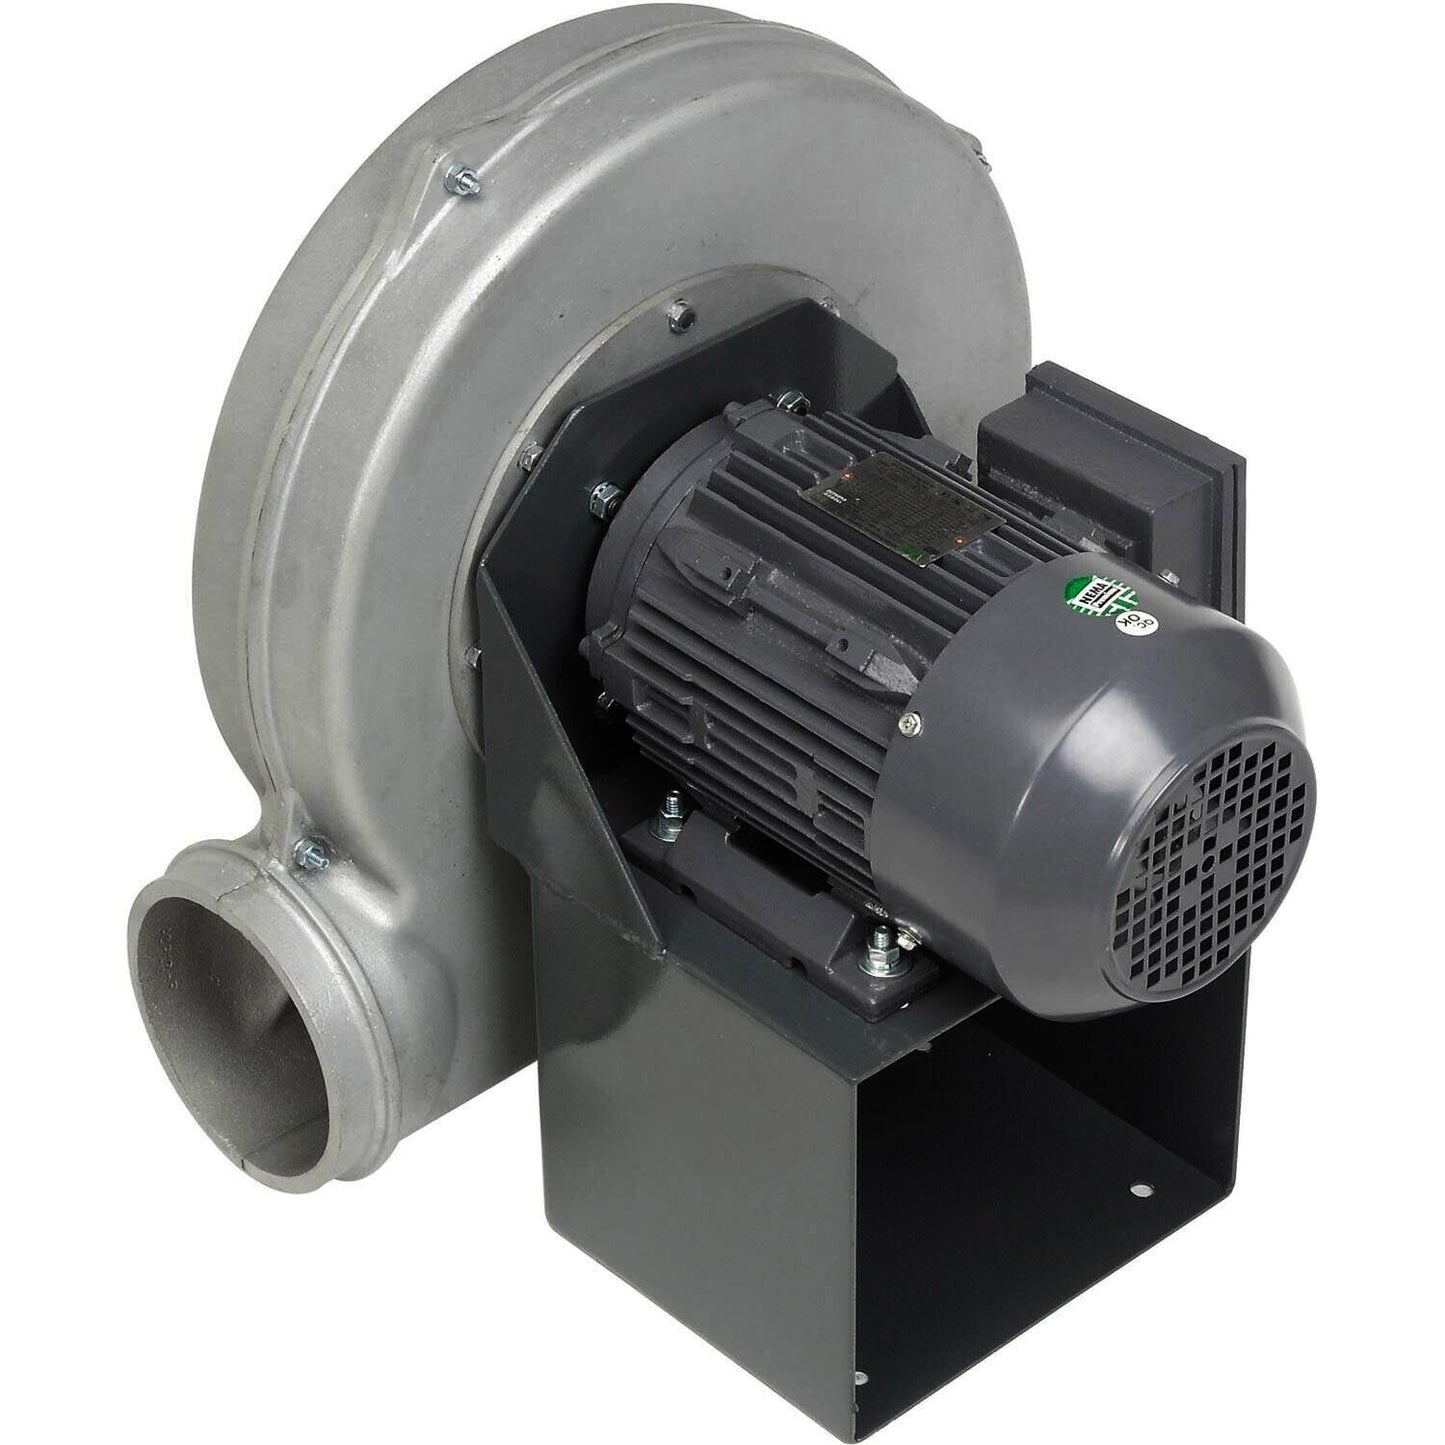 ALUMINUM BLOWER - 1600 CFM - 115/230V - 1 PH - 5 Hp - 7" In / 6" Out - TEFC - BH